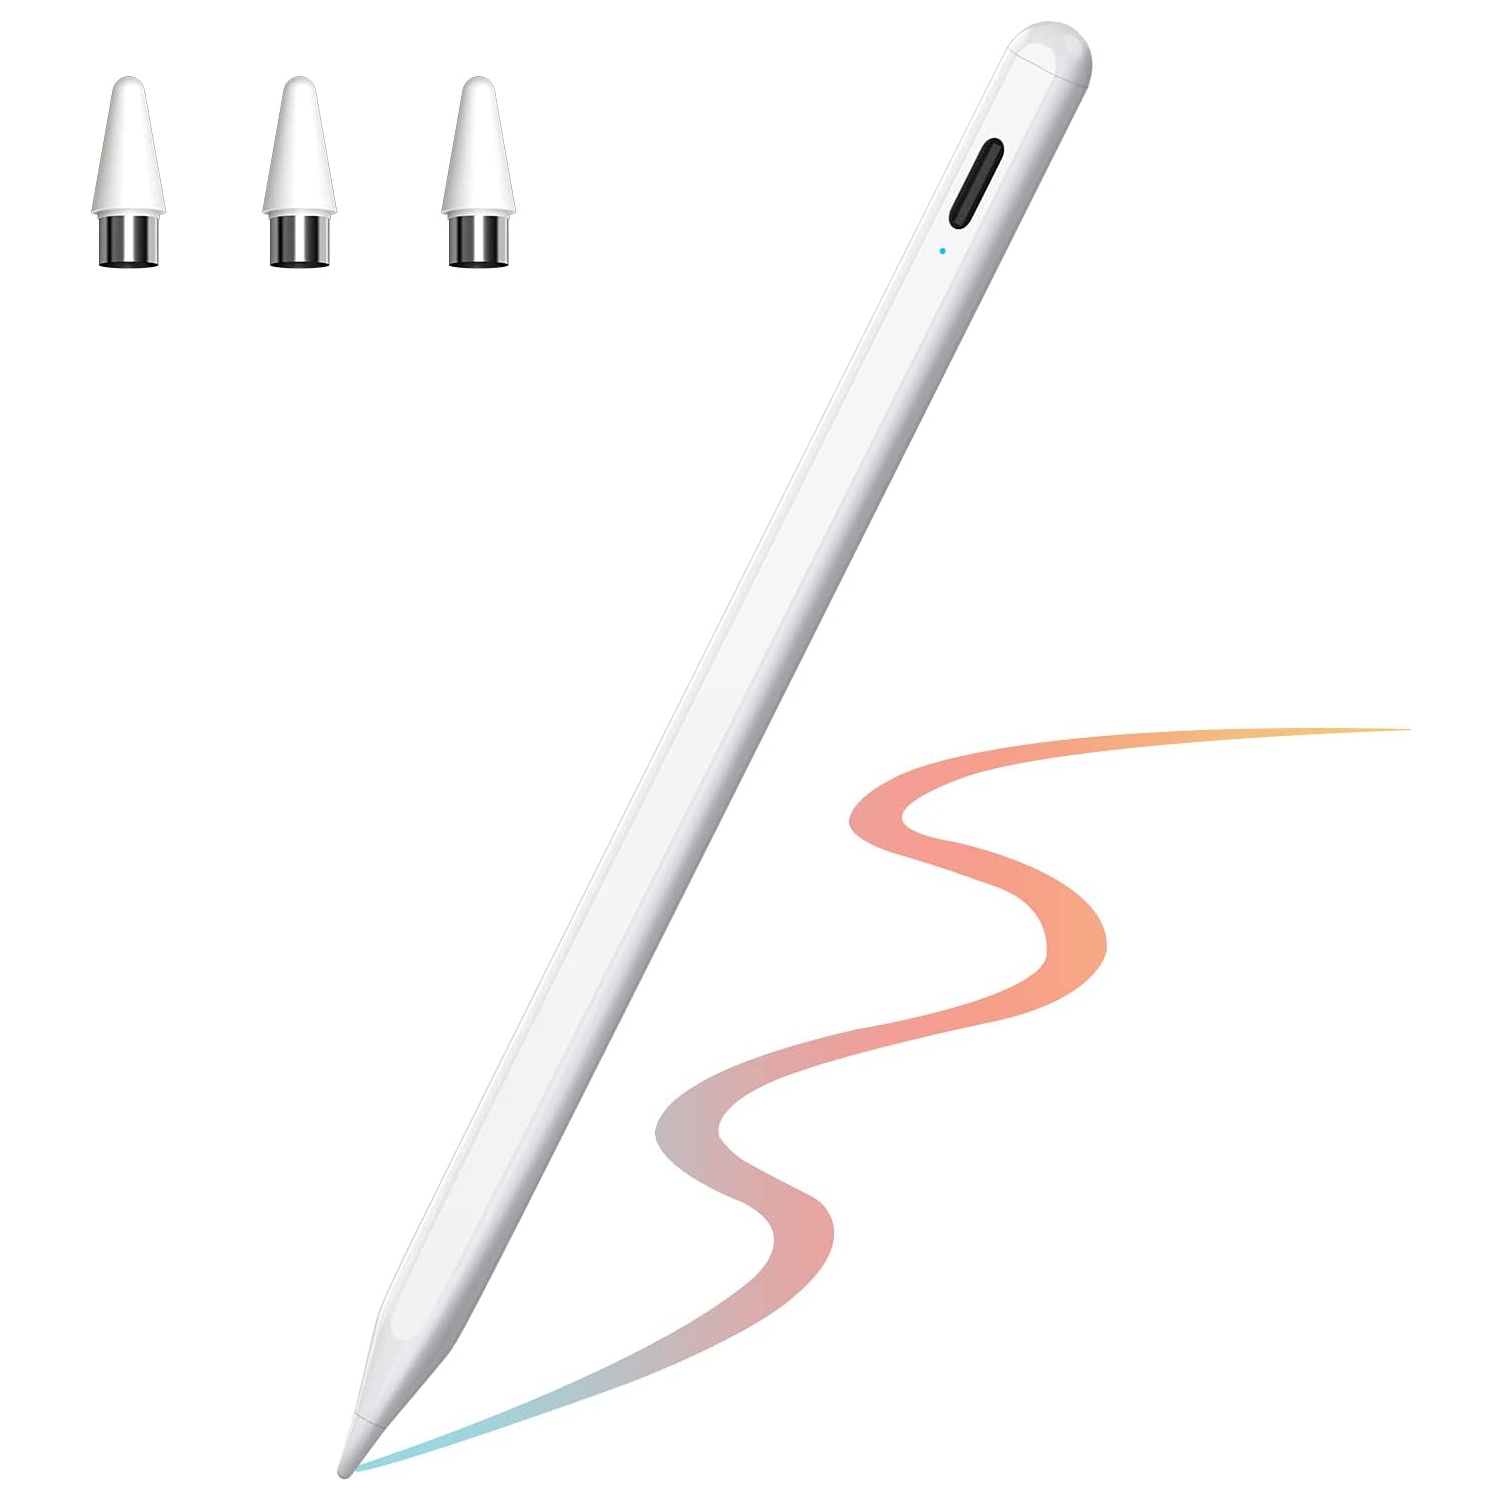 Active Stylus Pen Compatible for iOS and Android Touchscreens, 2021 Stylus Pen with Dual Touch Screen , Rechargeable Stylus Pencil for All Apple iPad/iPhone/iPad/Android